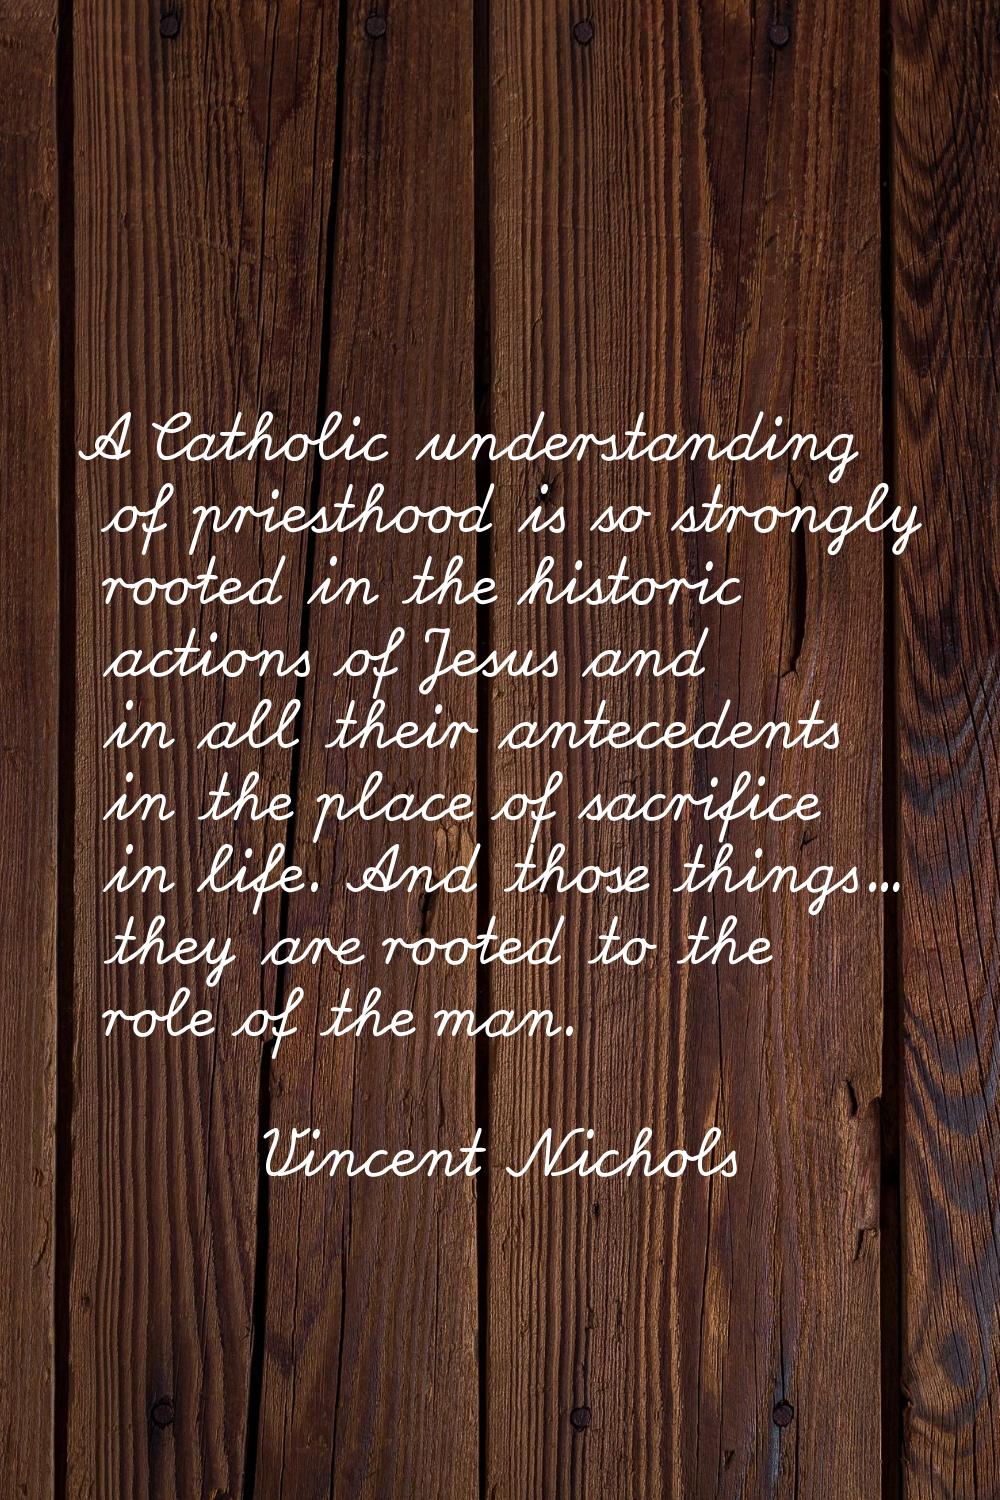 A Catholic understanding of priesthood is so strongly rooted in the historic actions of Jesus and i